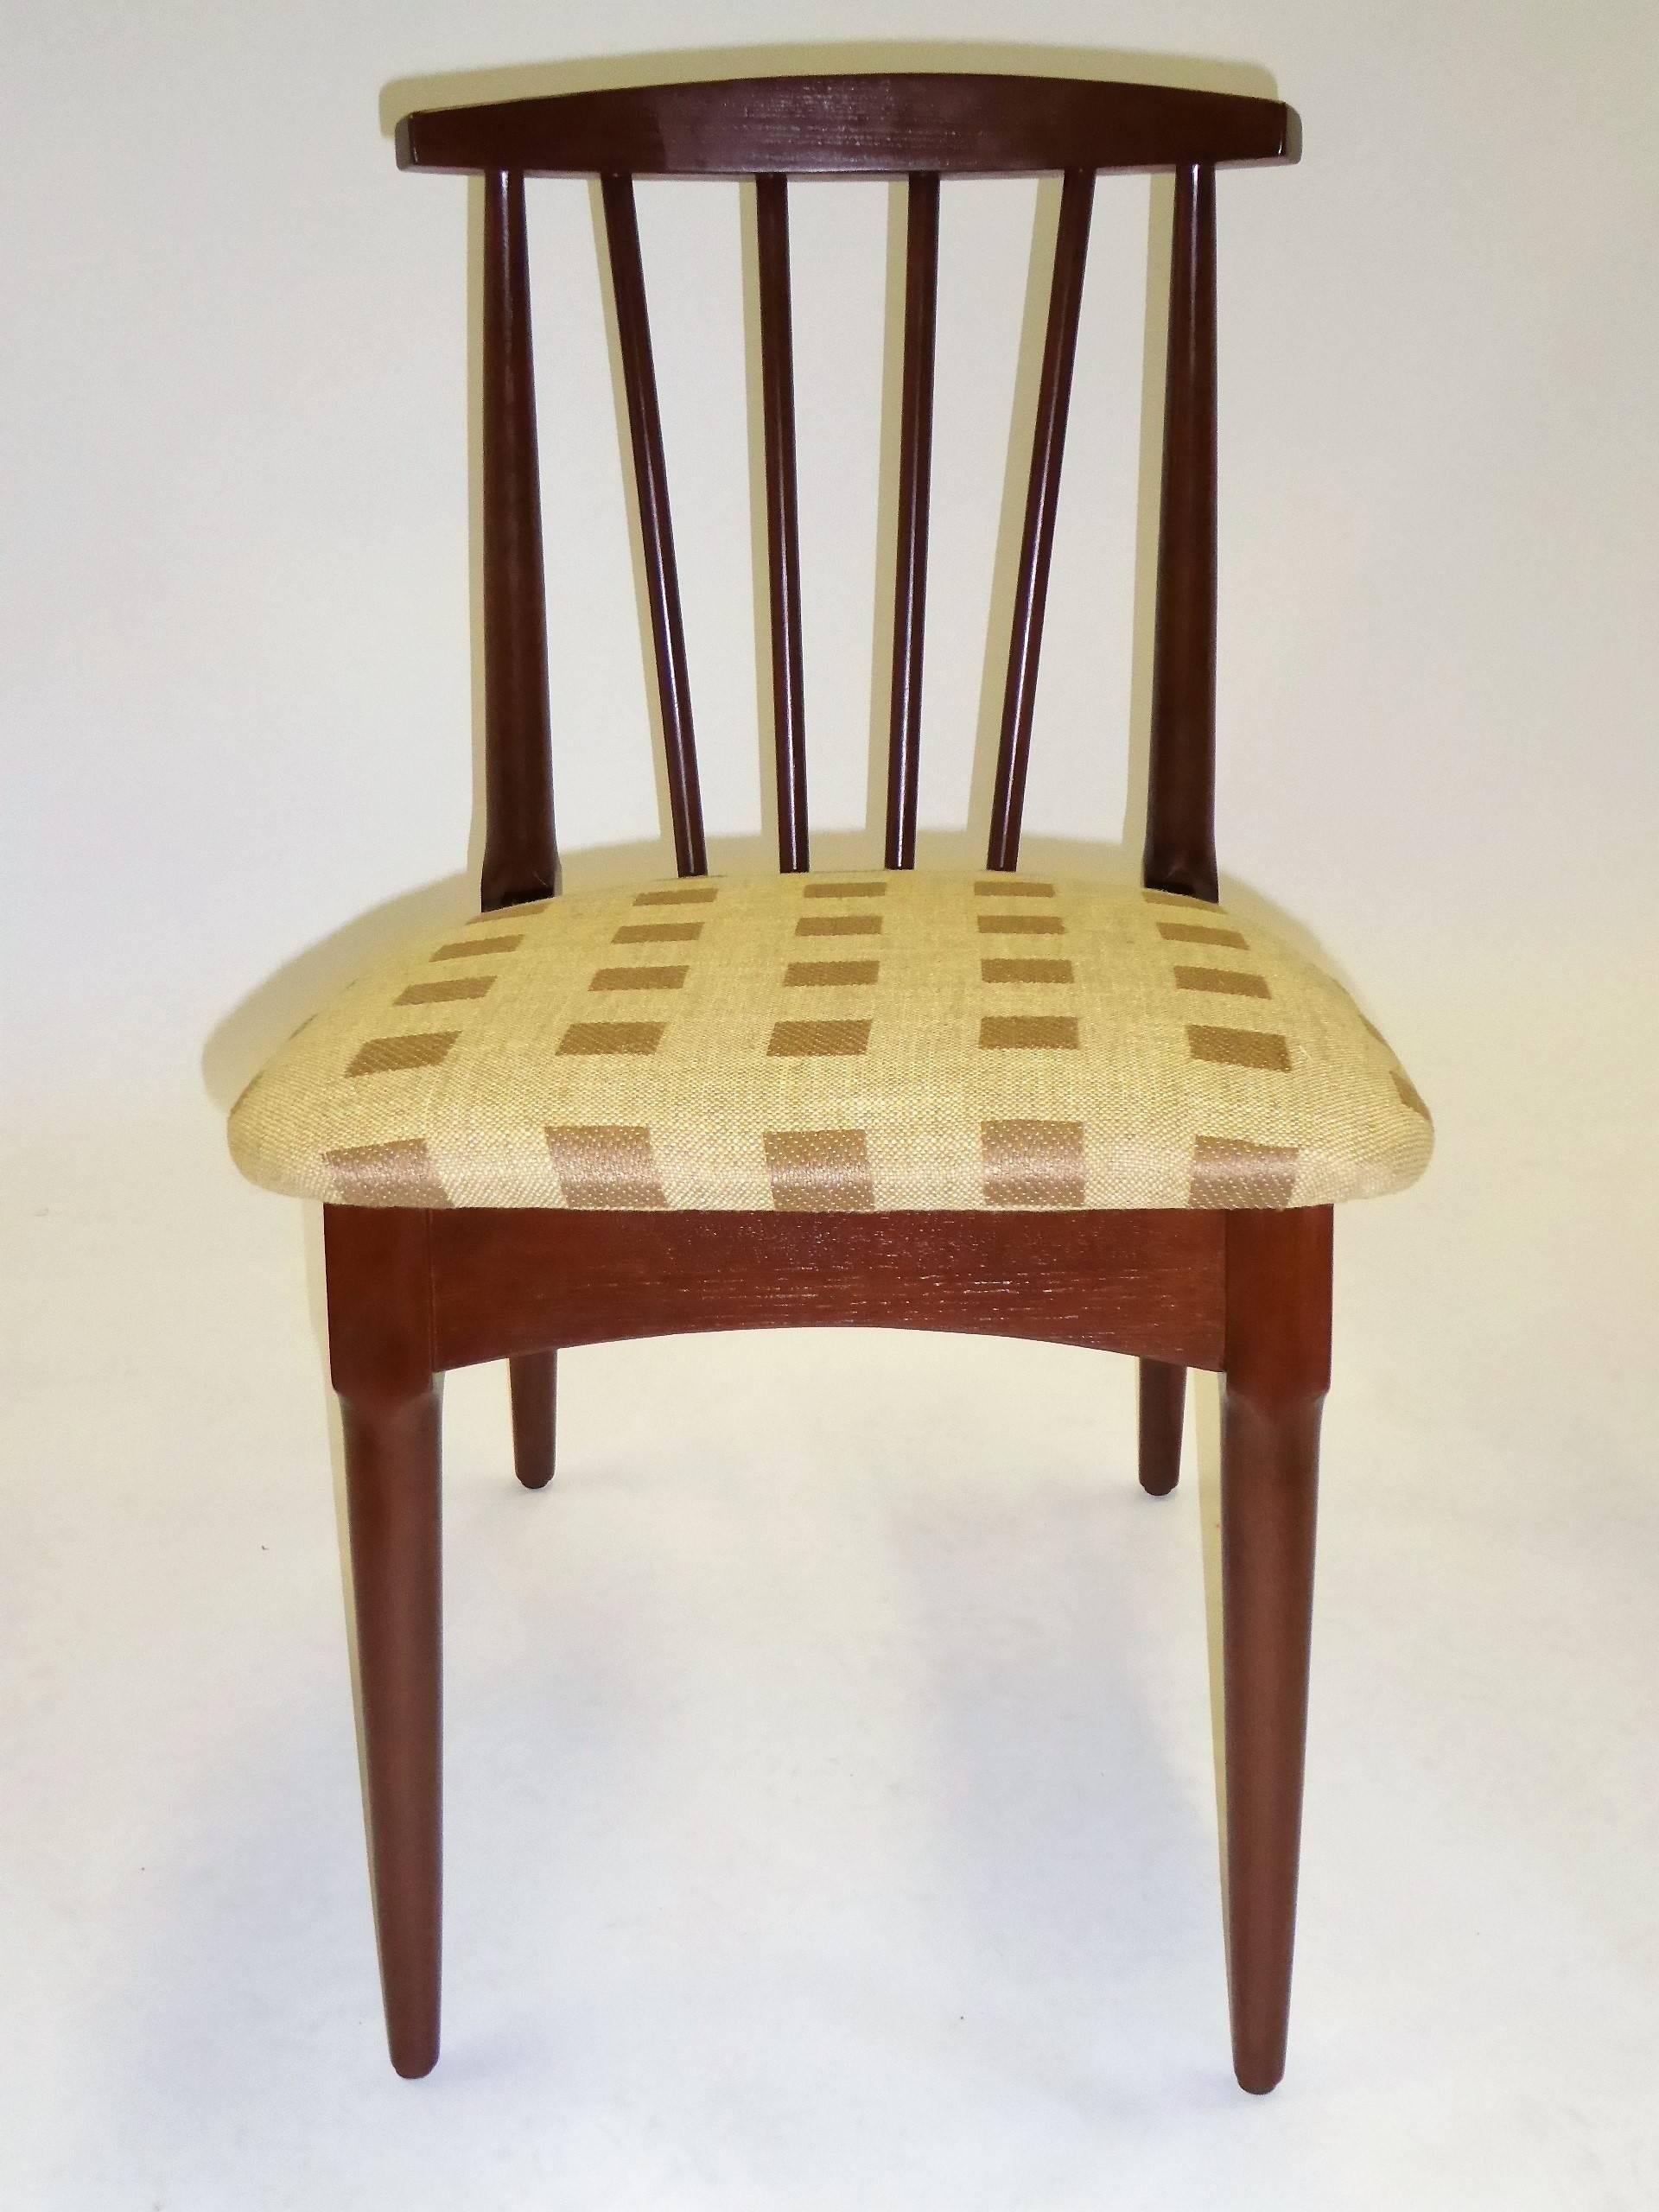 Mid-20th Century Six 1950s Danish Modern Style Walnut Spindle Back Dining Chairs